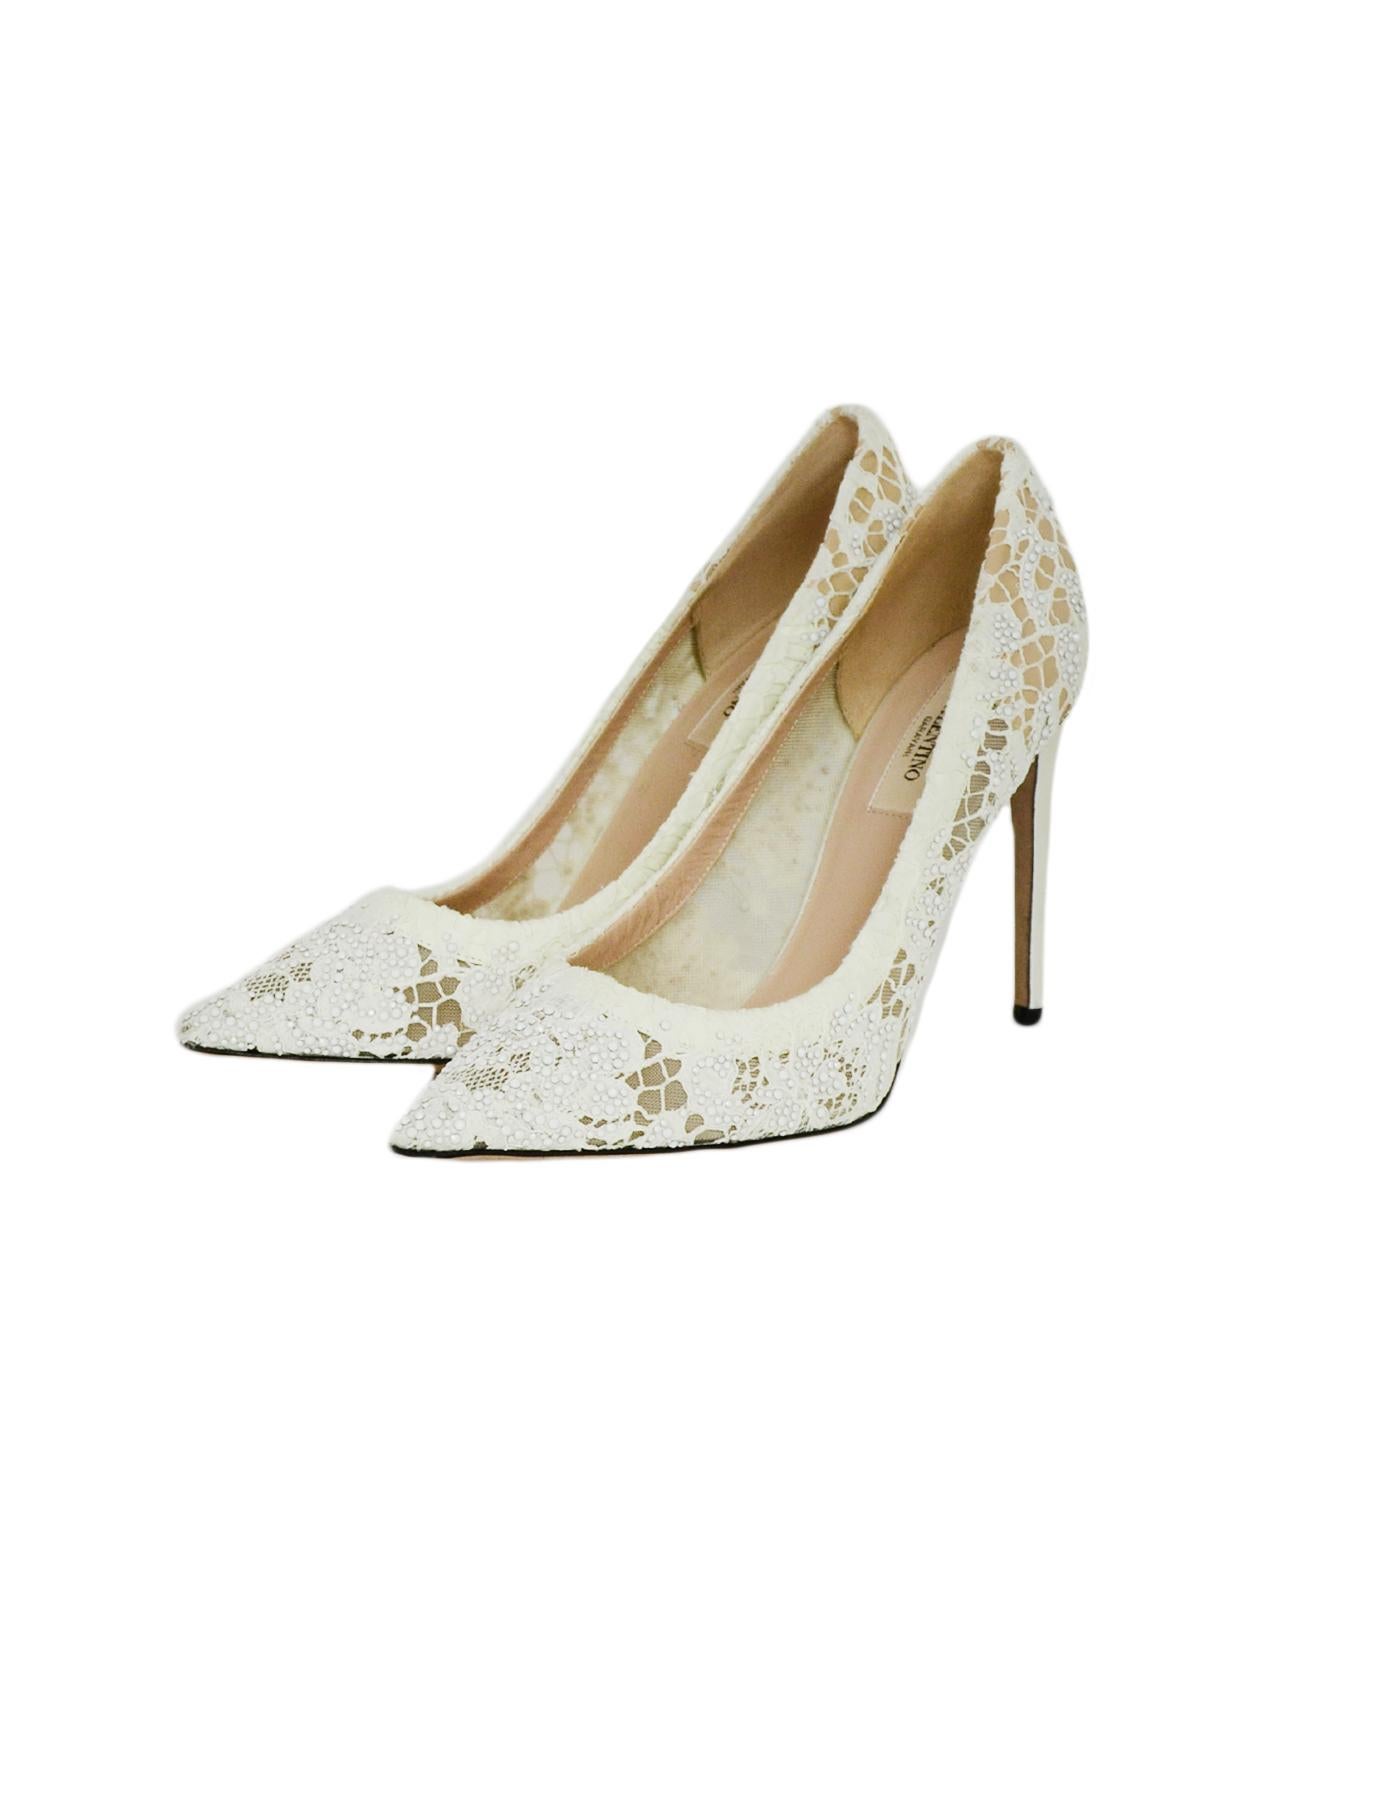 Valentino off-White Lace/Crystal Point Toe Pumps sz 39

Made In: Italy
Color: off-white
Materials: Lace, leather
Closure/Opening: Slide on
Overall Condition: Excellent pre-owned condition, very minor wear on soles and light marks to heels
Estimated